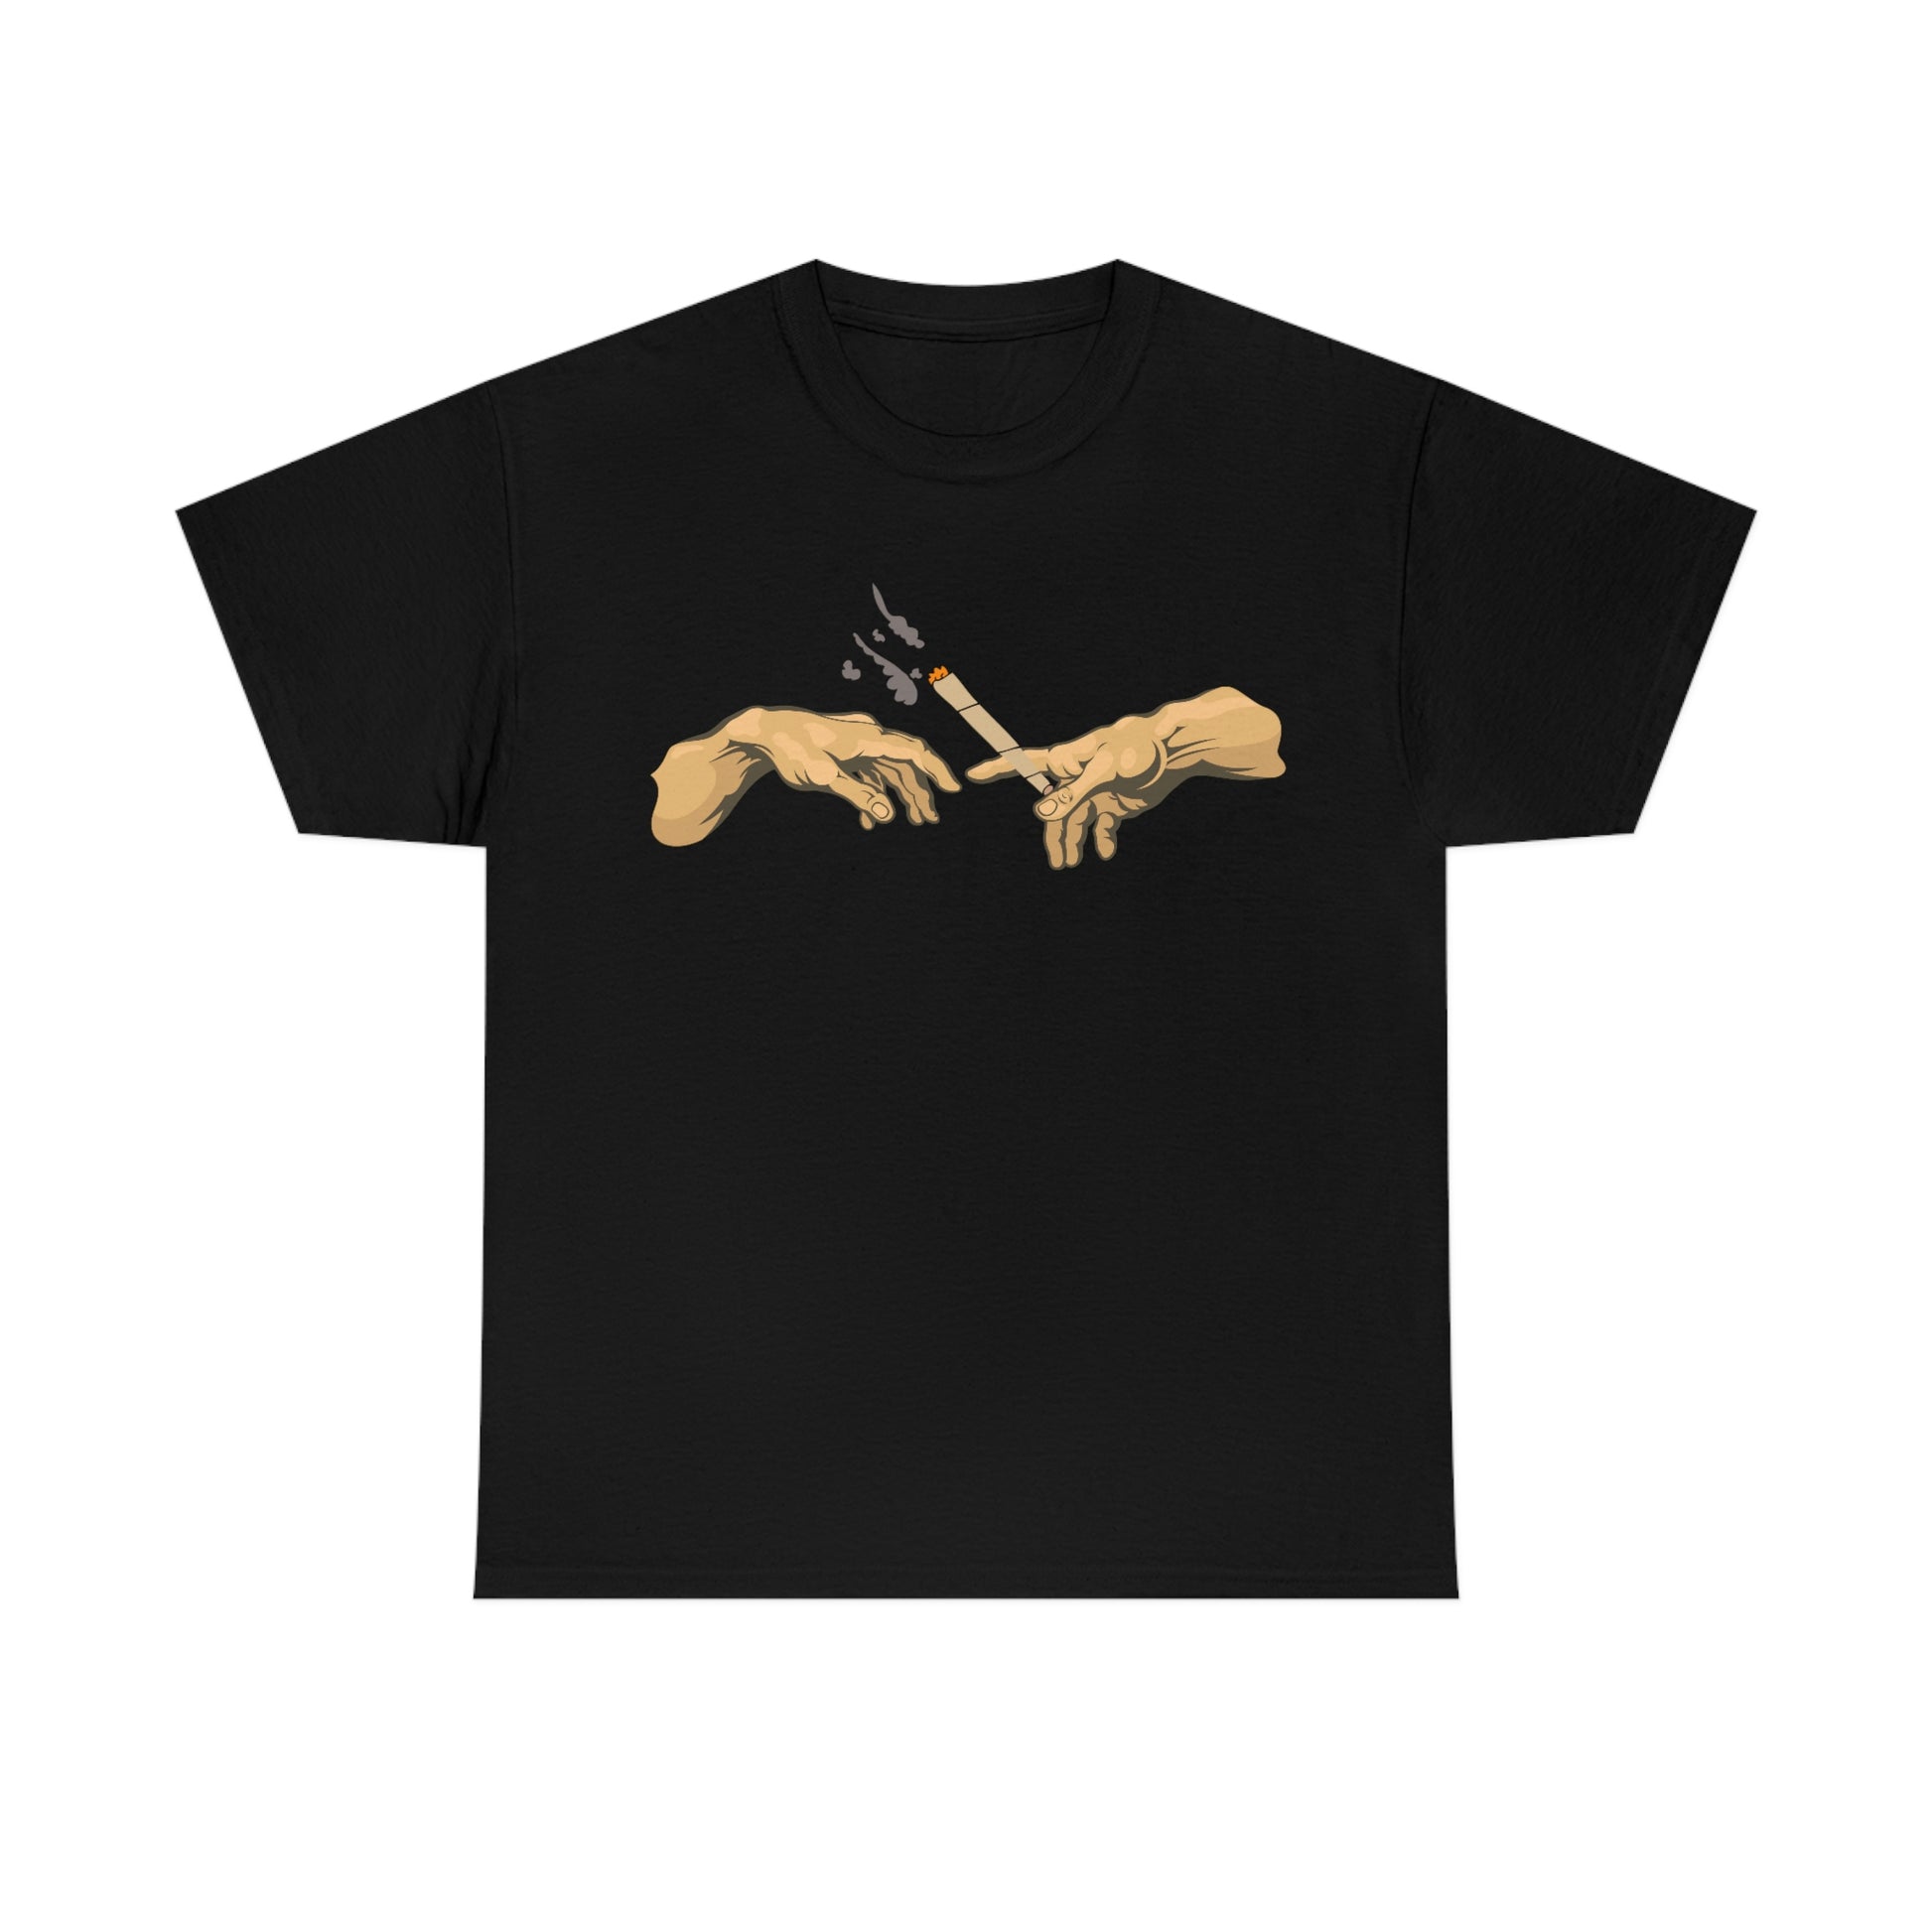 The Michelangelo Smoking Joint Tee t-shirt.